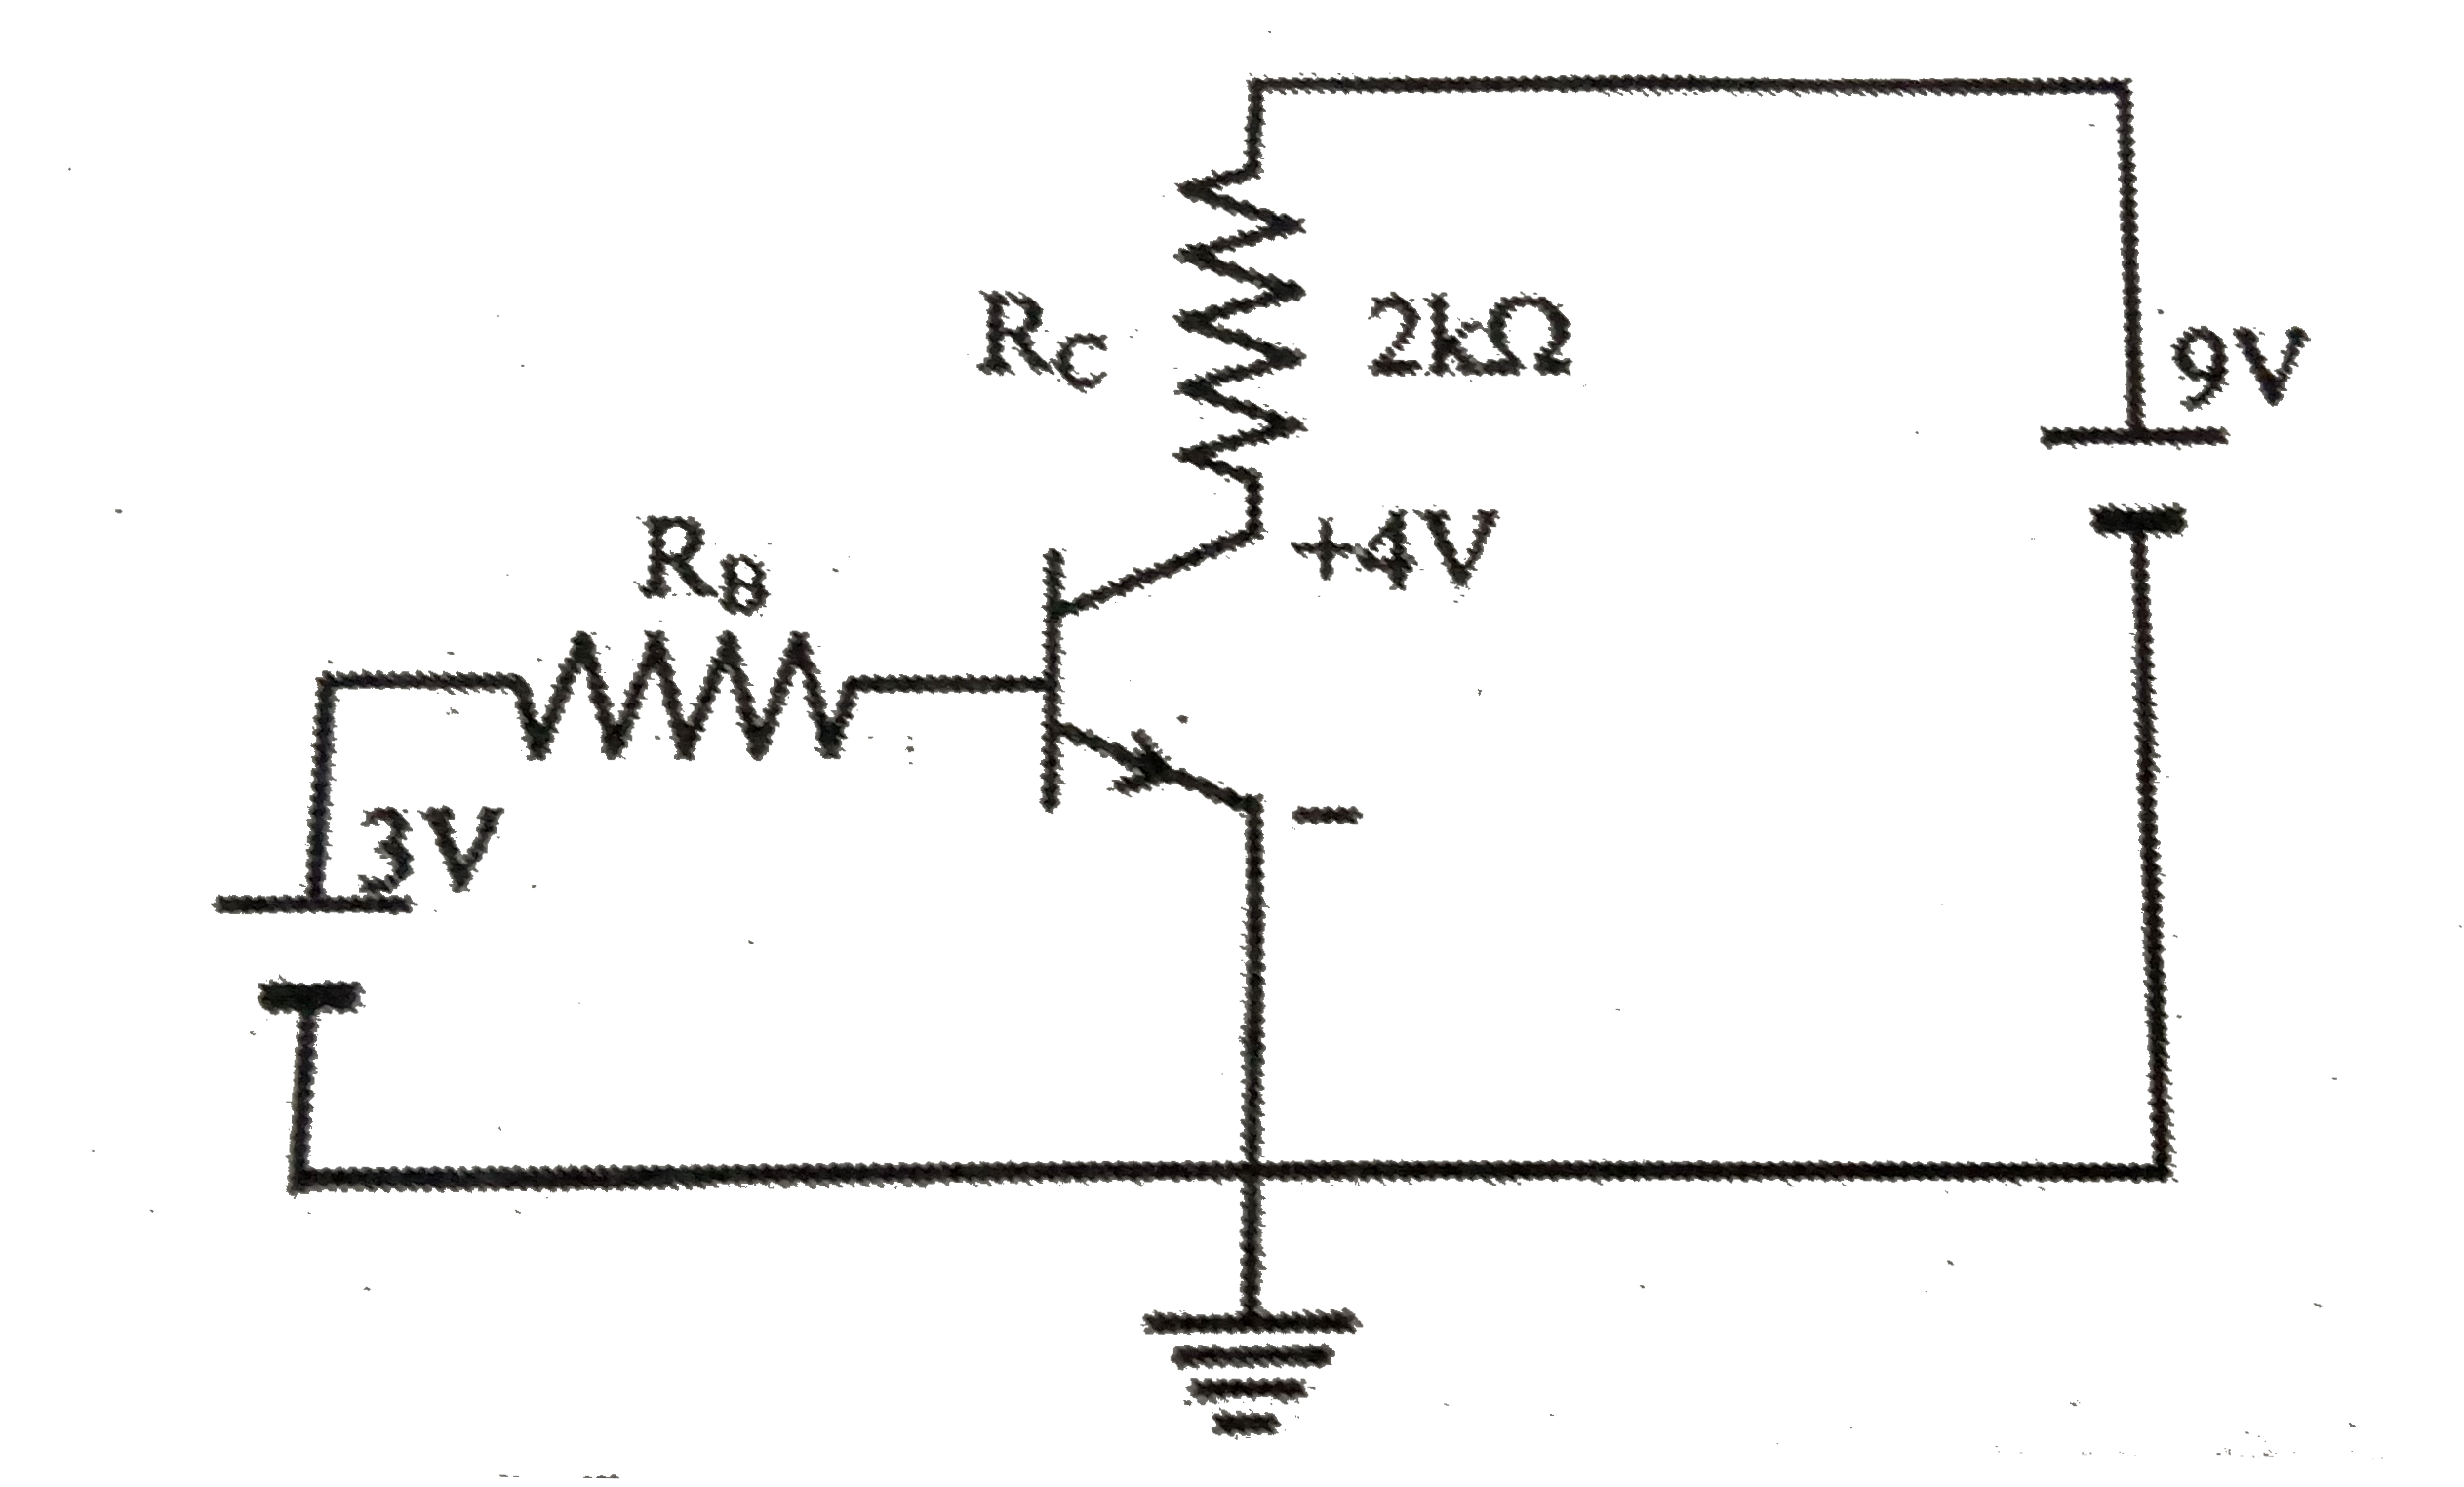 What is the base resistance R(B) in the circuit as shown in figure , if beta(d.c.) = 90, V(BE) = 0.7 V, V(CE) =4V?